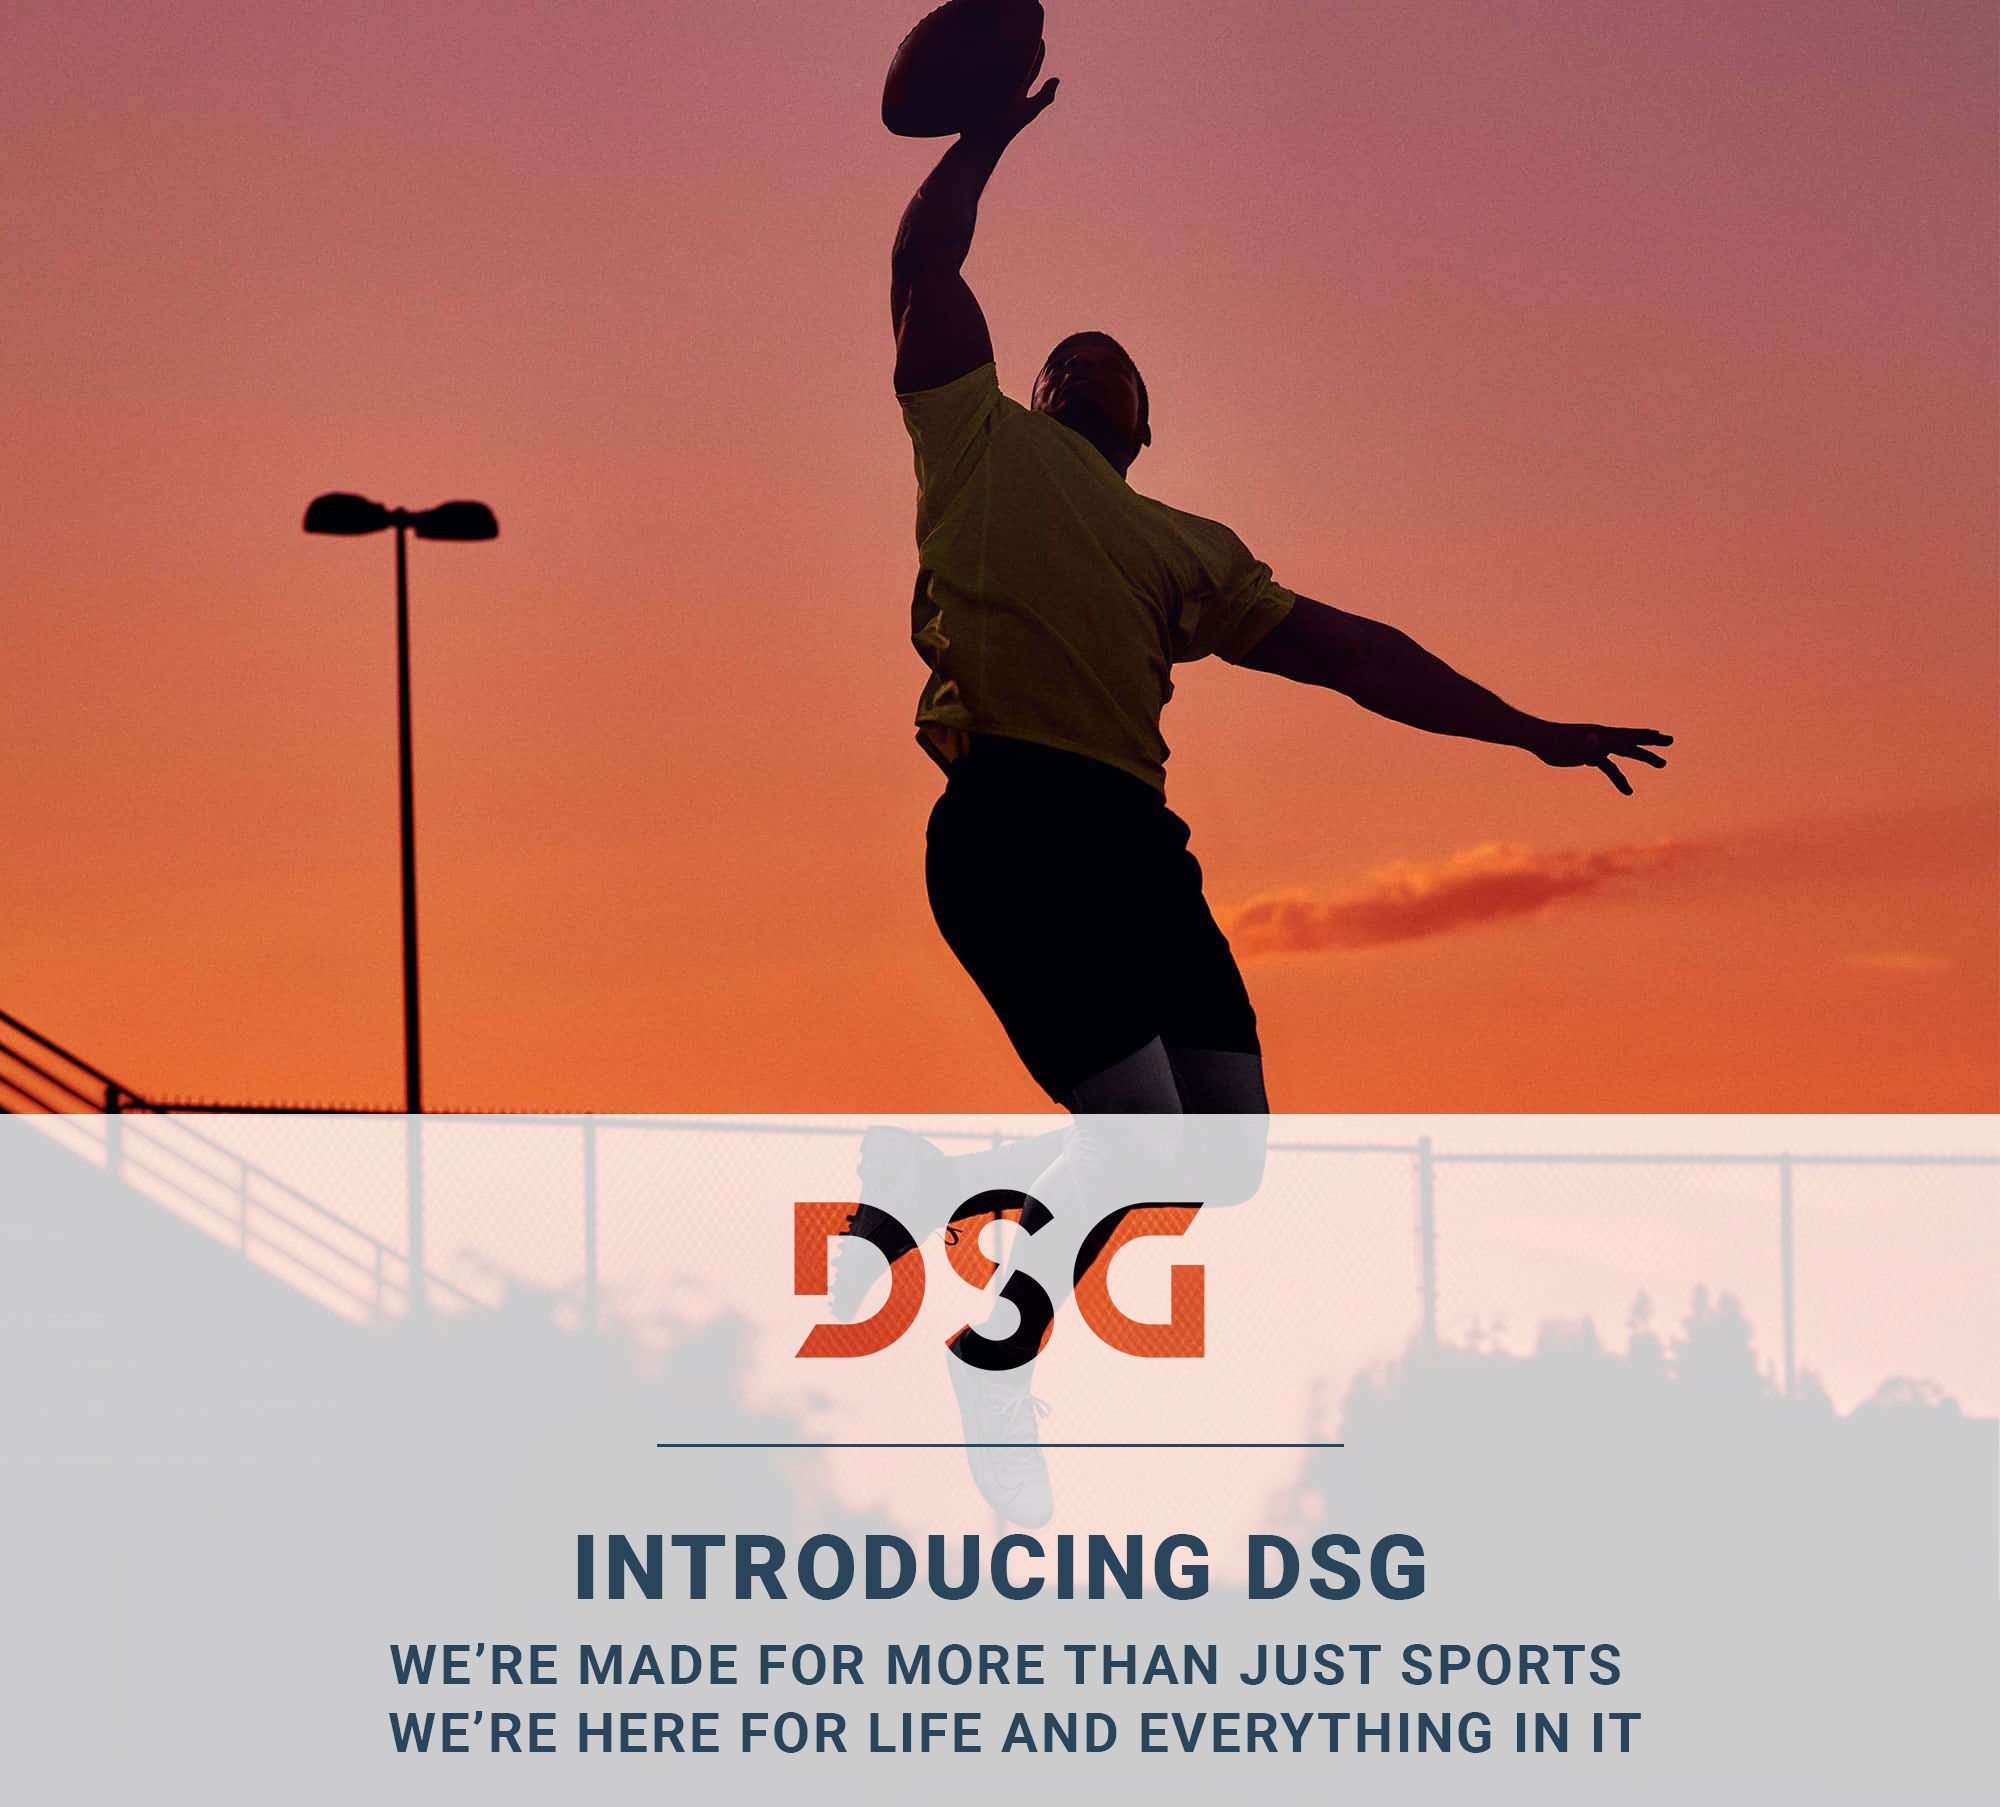 DSG | INTRODUCING DSG WE'RE MADE FOR MORE THAN JUST SPORTS WE'RE MADE FOR LIFE AND EVERYTHING IN IT